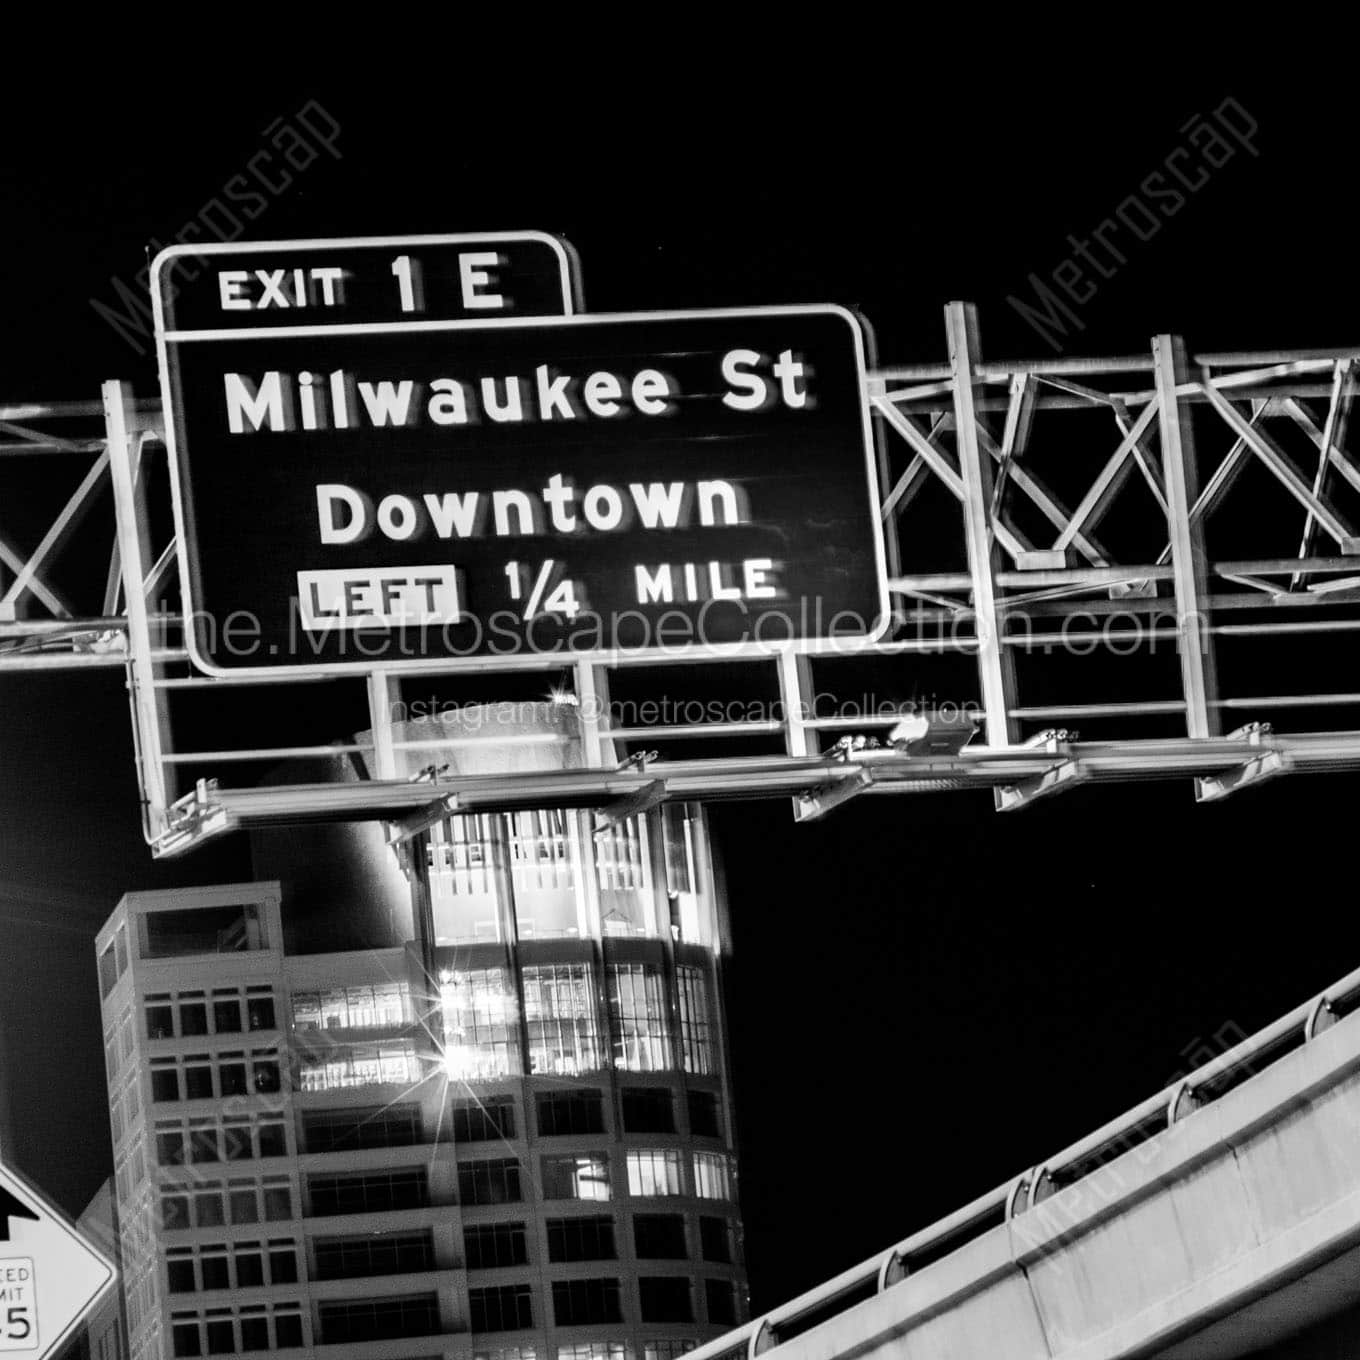 milwaukee st downtown highway sign Black & White Office Art